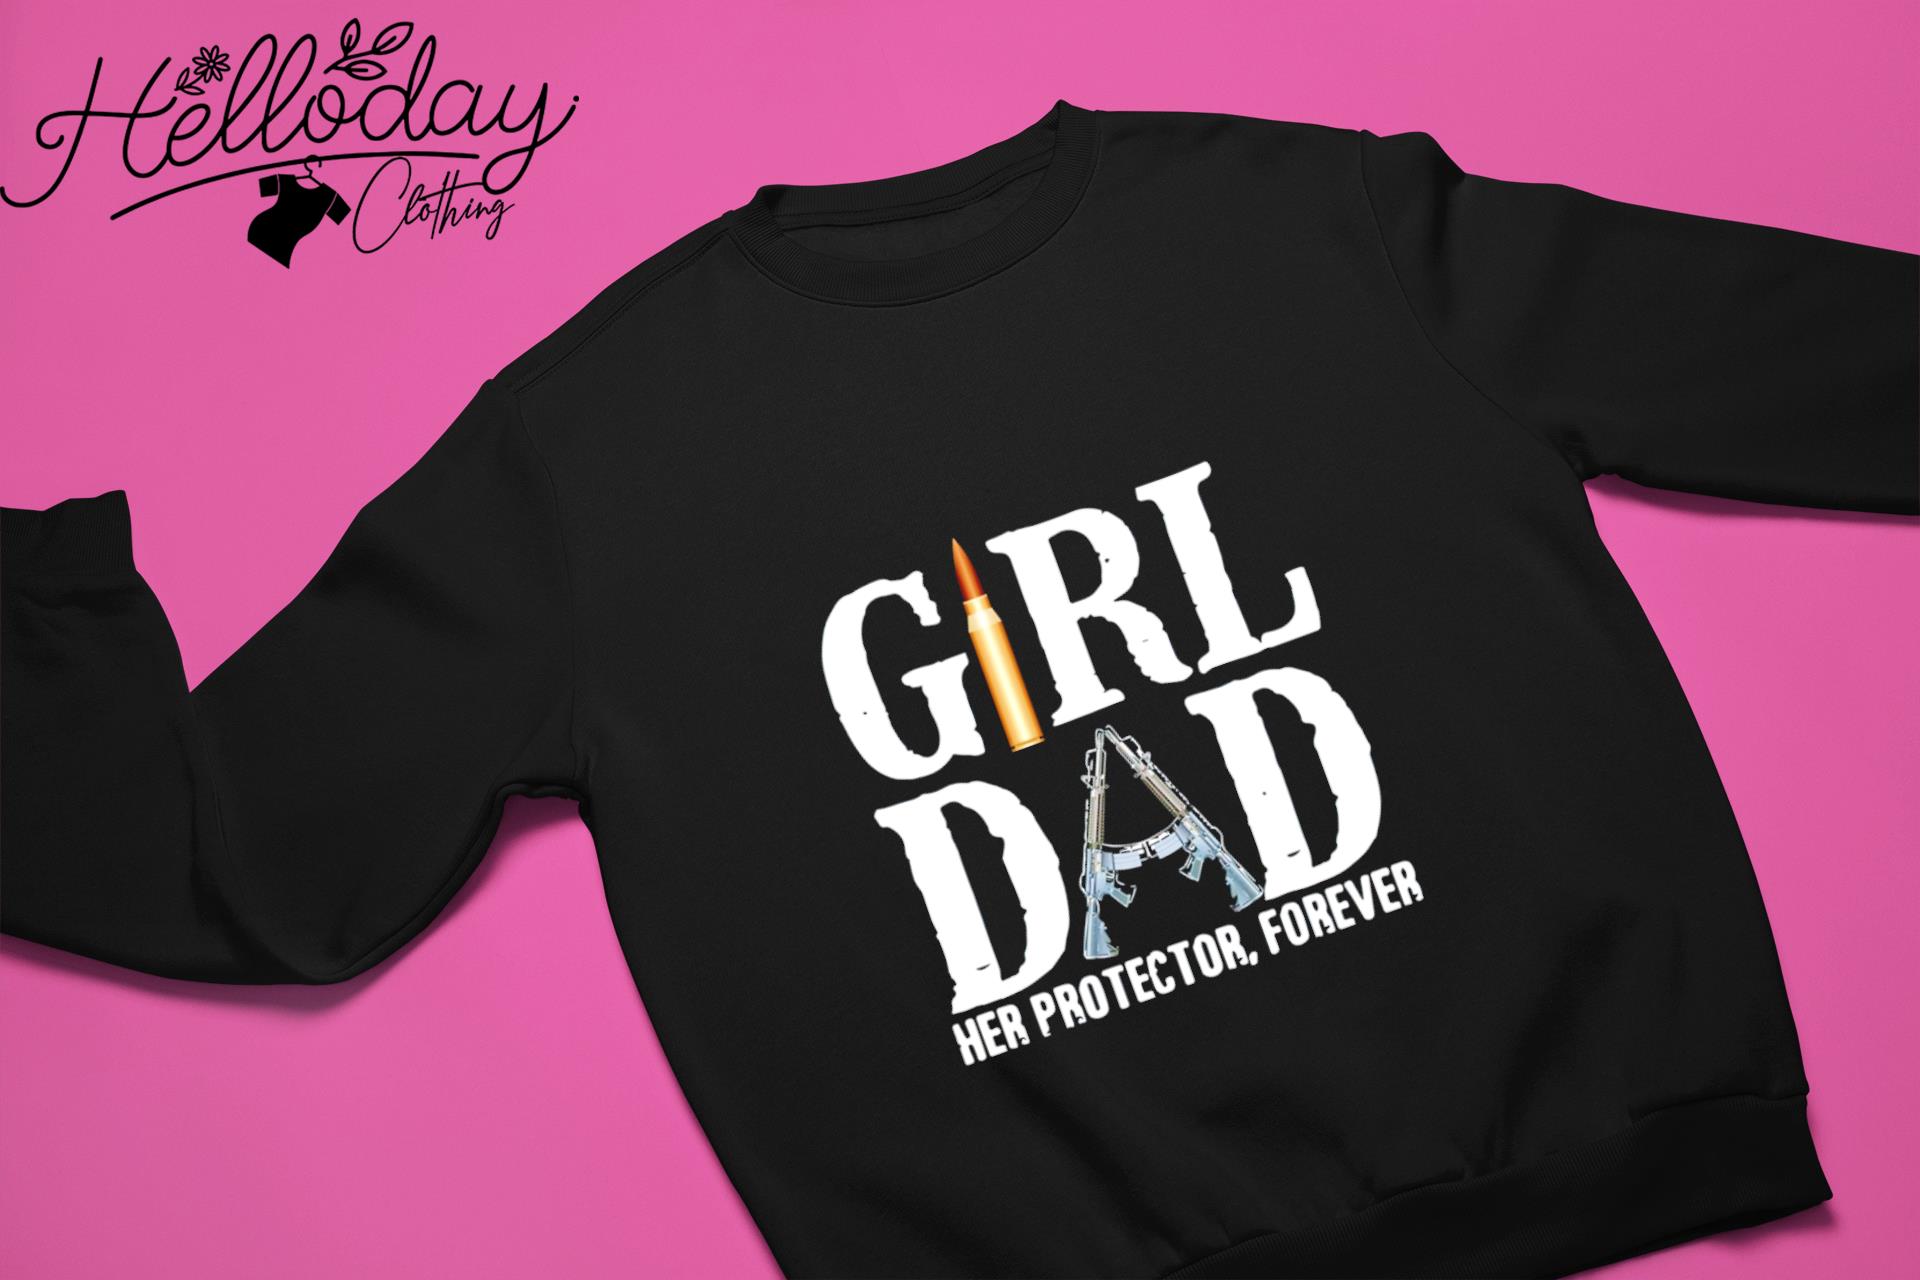 Original Girl Dad Her Protector Forever Shirt, hoodie, sweater, long sleeve  and tank top